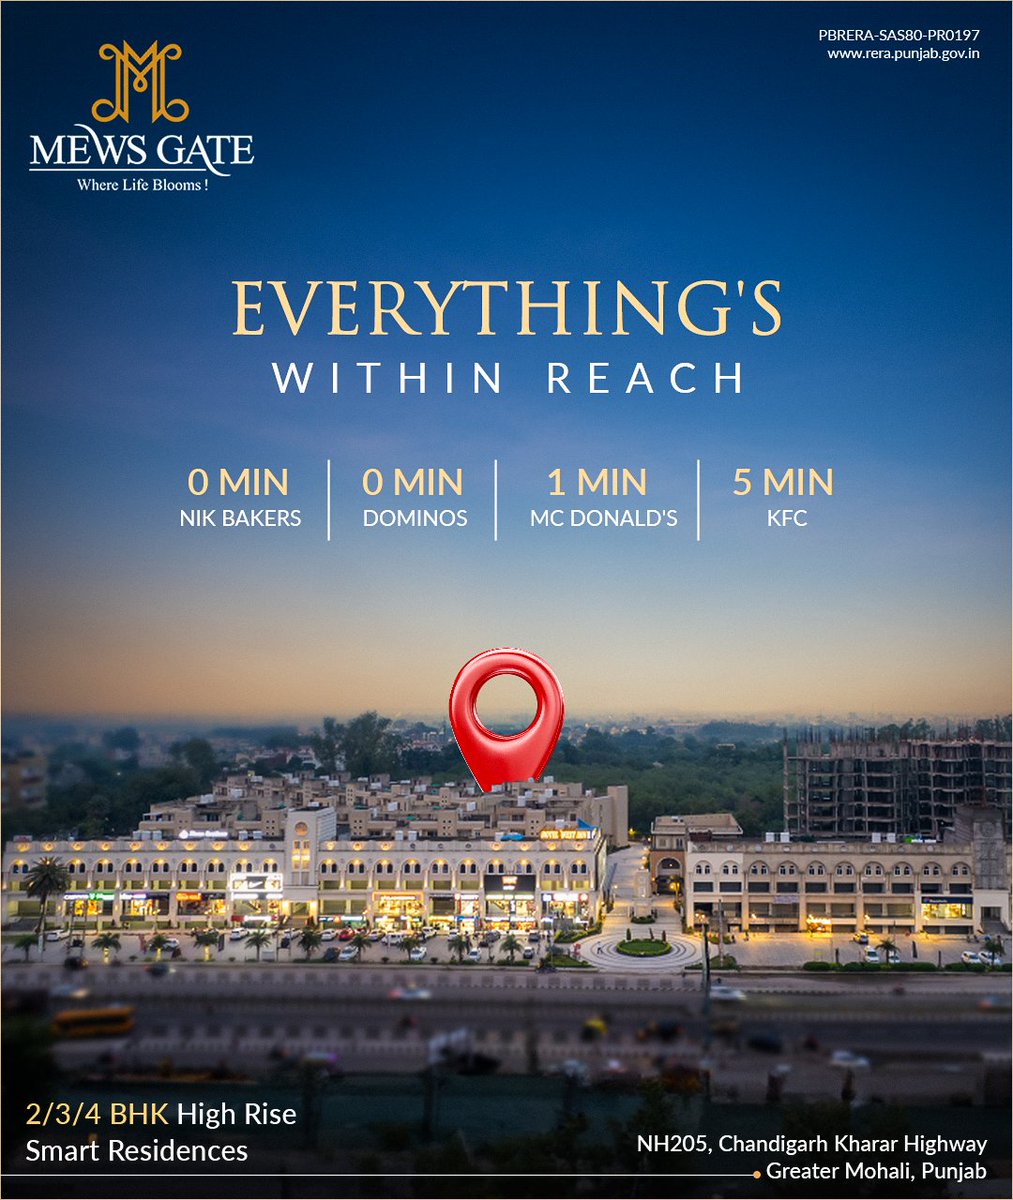 Everything you desire is just a short distance away. 🏠2/3/4 BHK Alexa-Operated Smart Residences at Mews Gate ↘️Call us at 90695-90695 #MewsGate #SmartResidences #NikBakers #Dominos #McDonalds #KFC #Luxurious #AlexaHomes #Apartments #ResidentialProperty #Homes